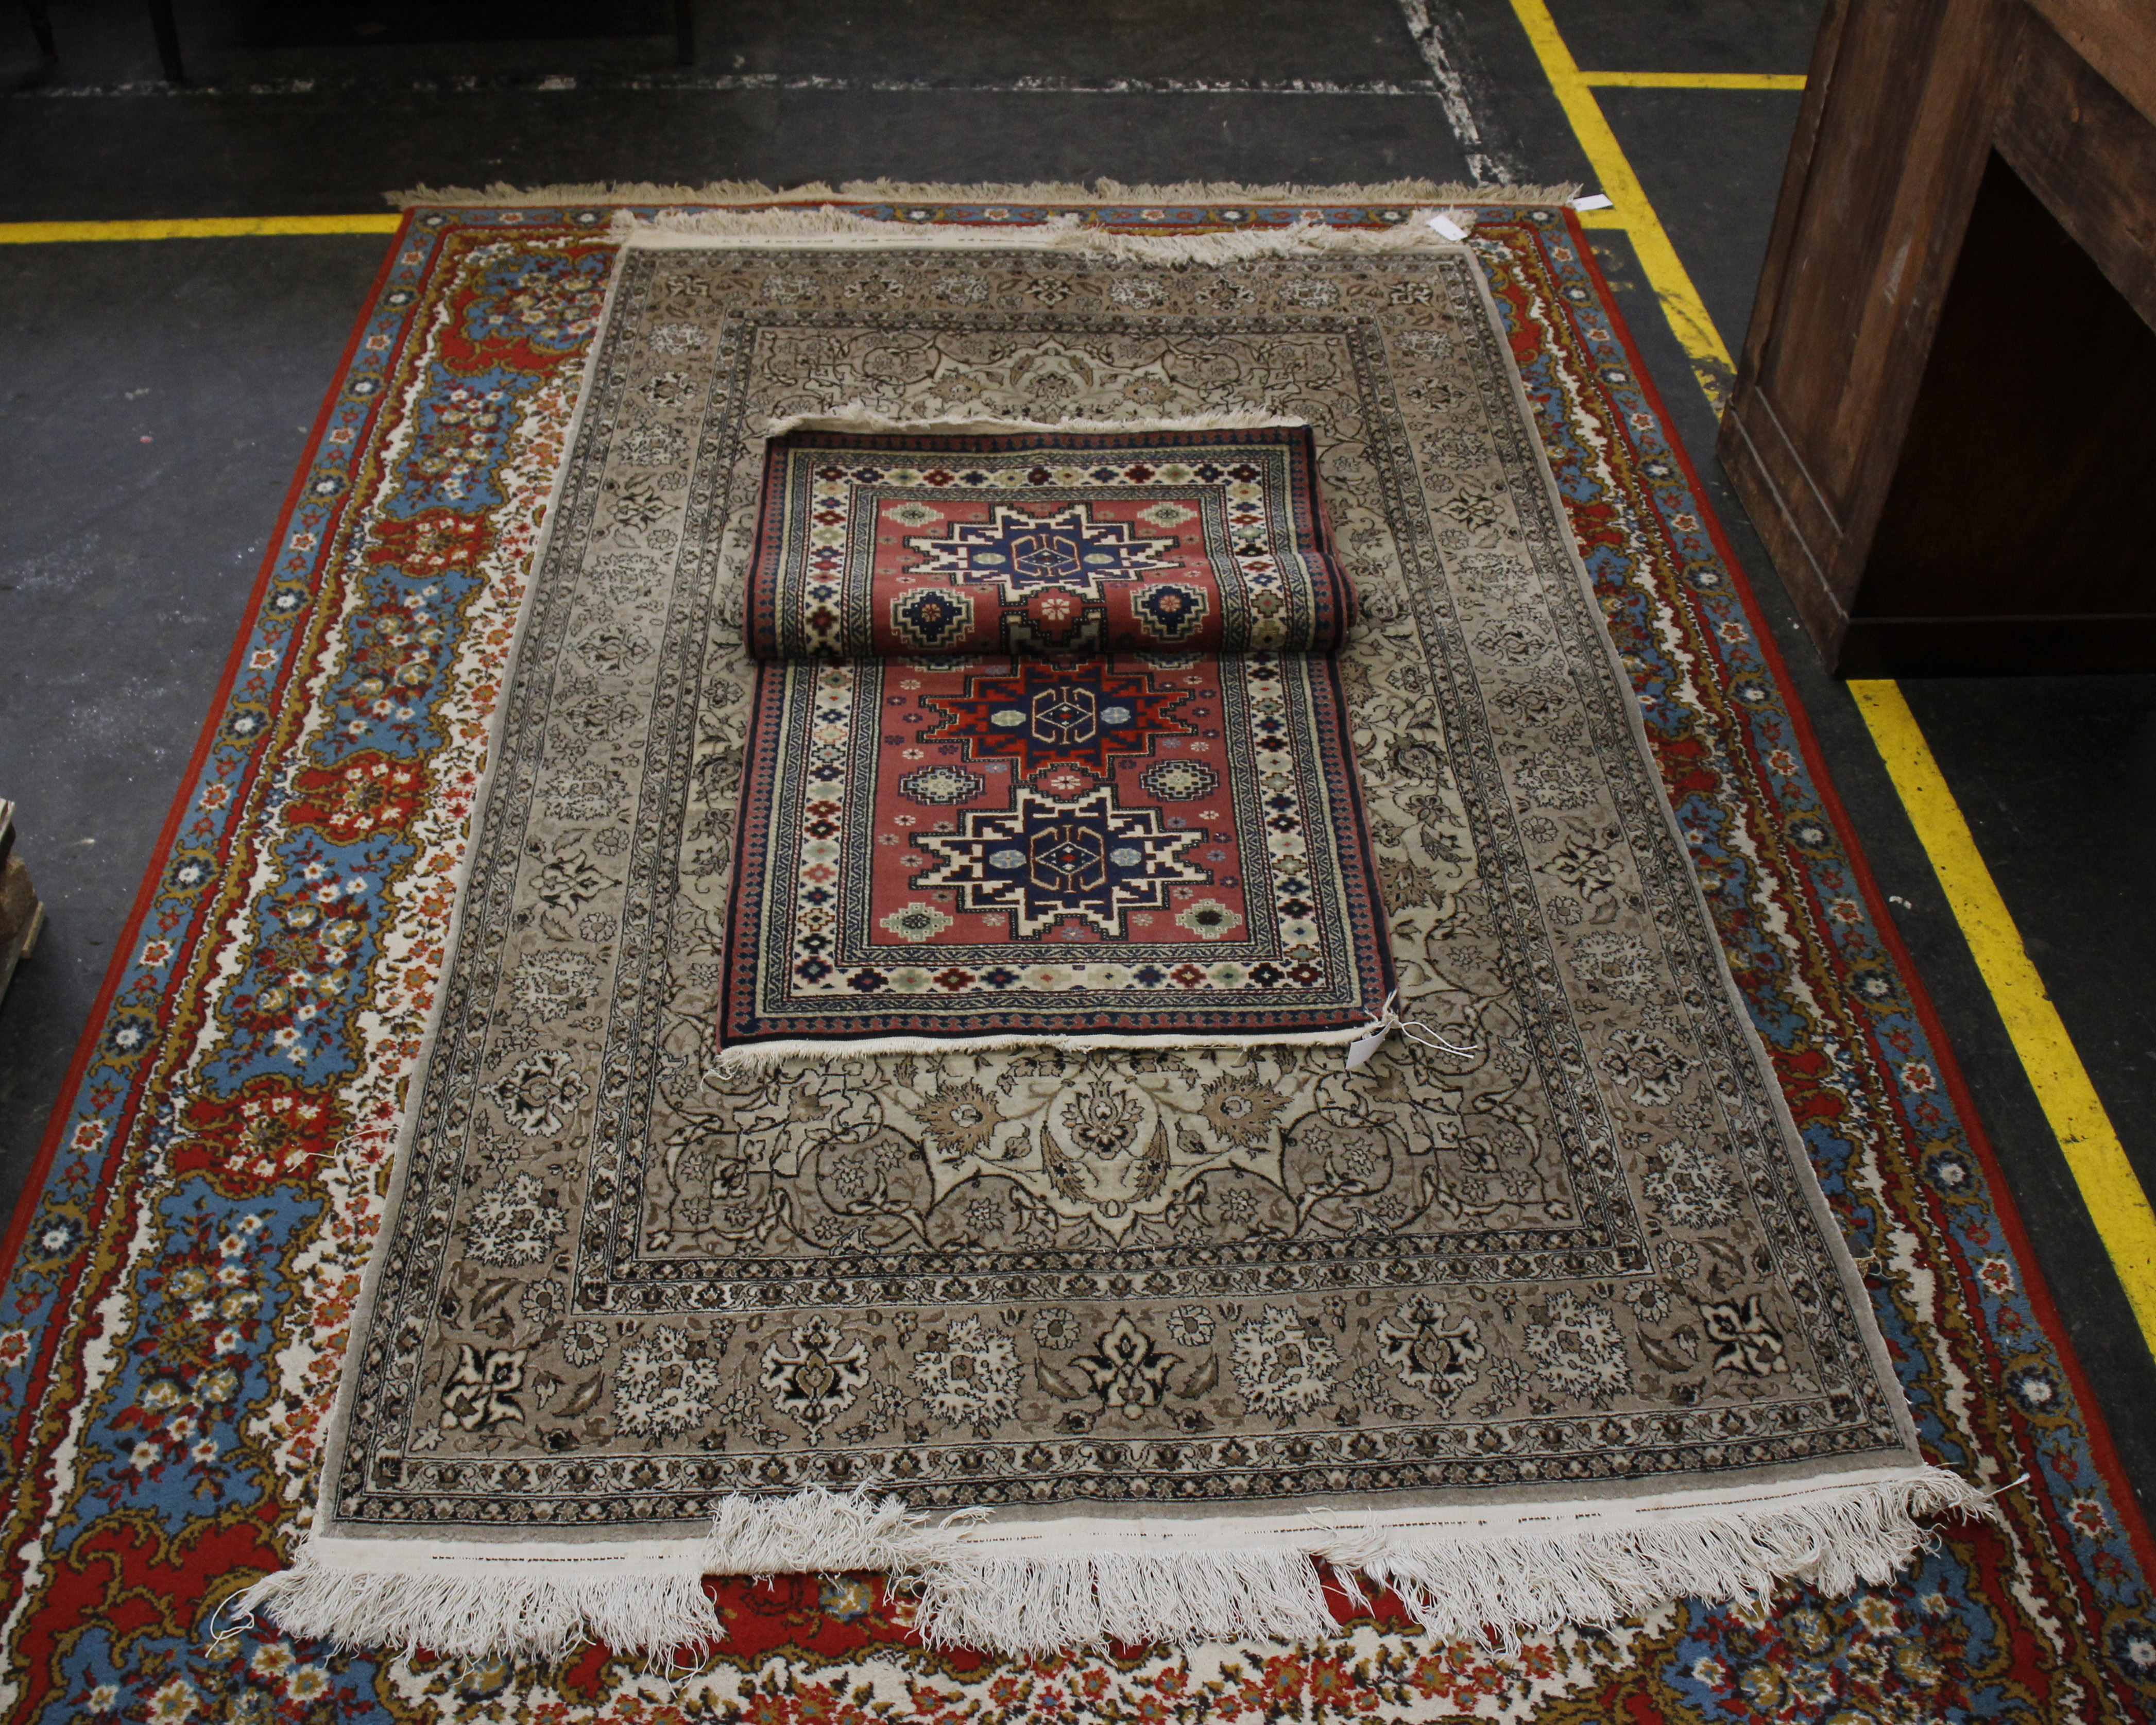 2 modern machine woven rugs together a machine woven Afghan runner.